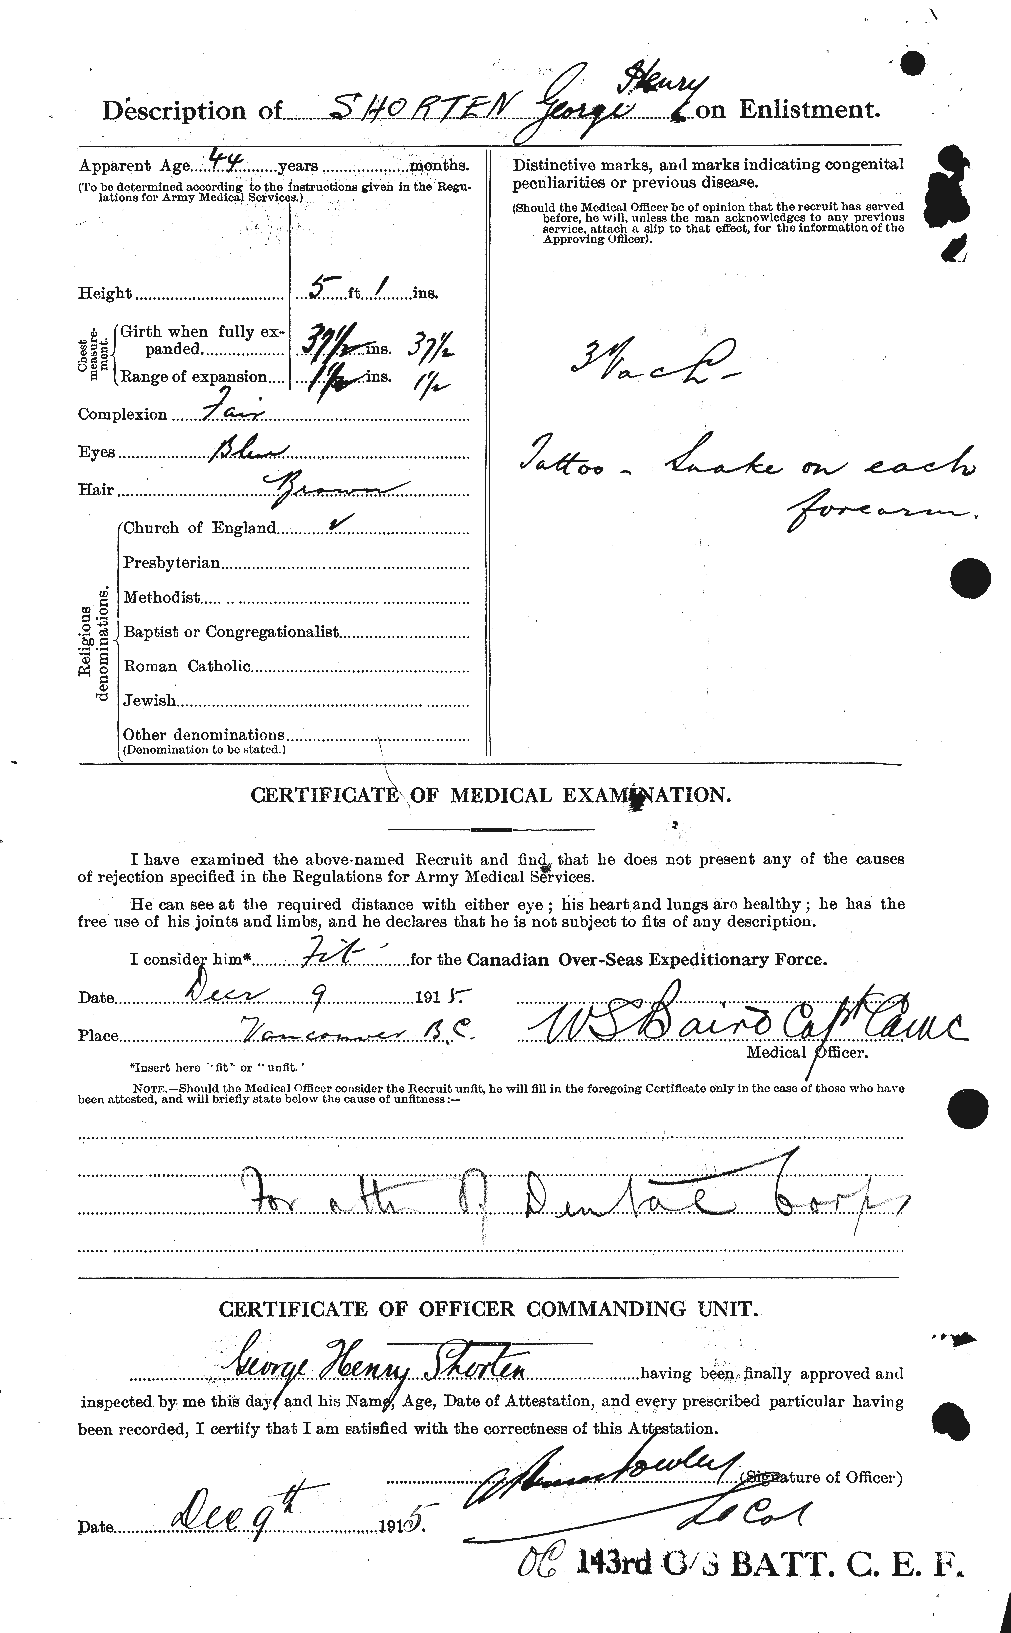 Personnel Records of the First World War - CEF 093423b